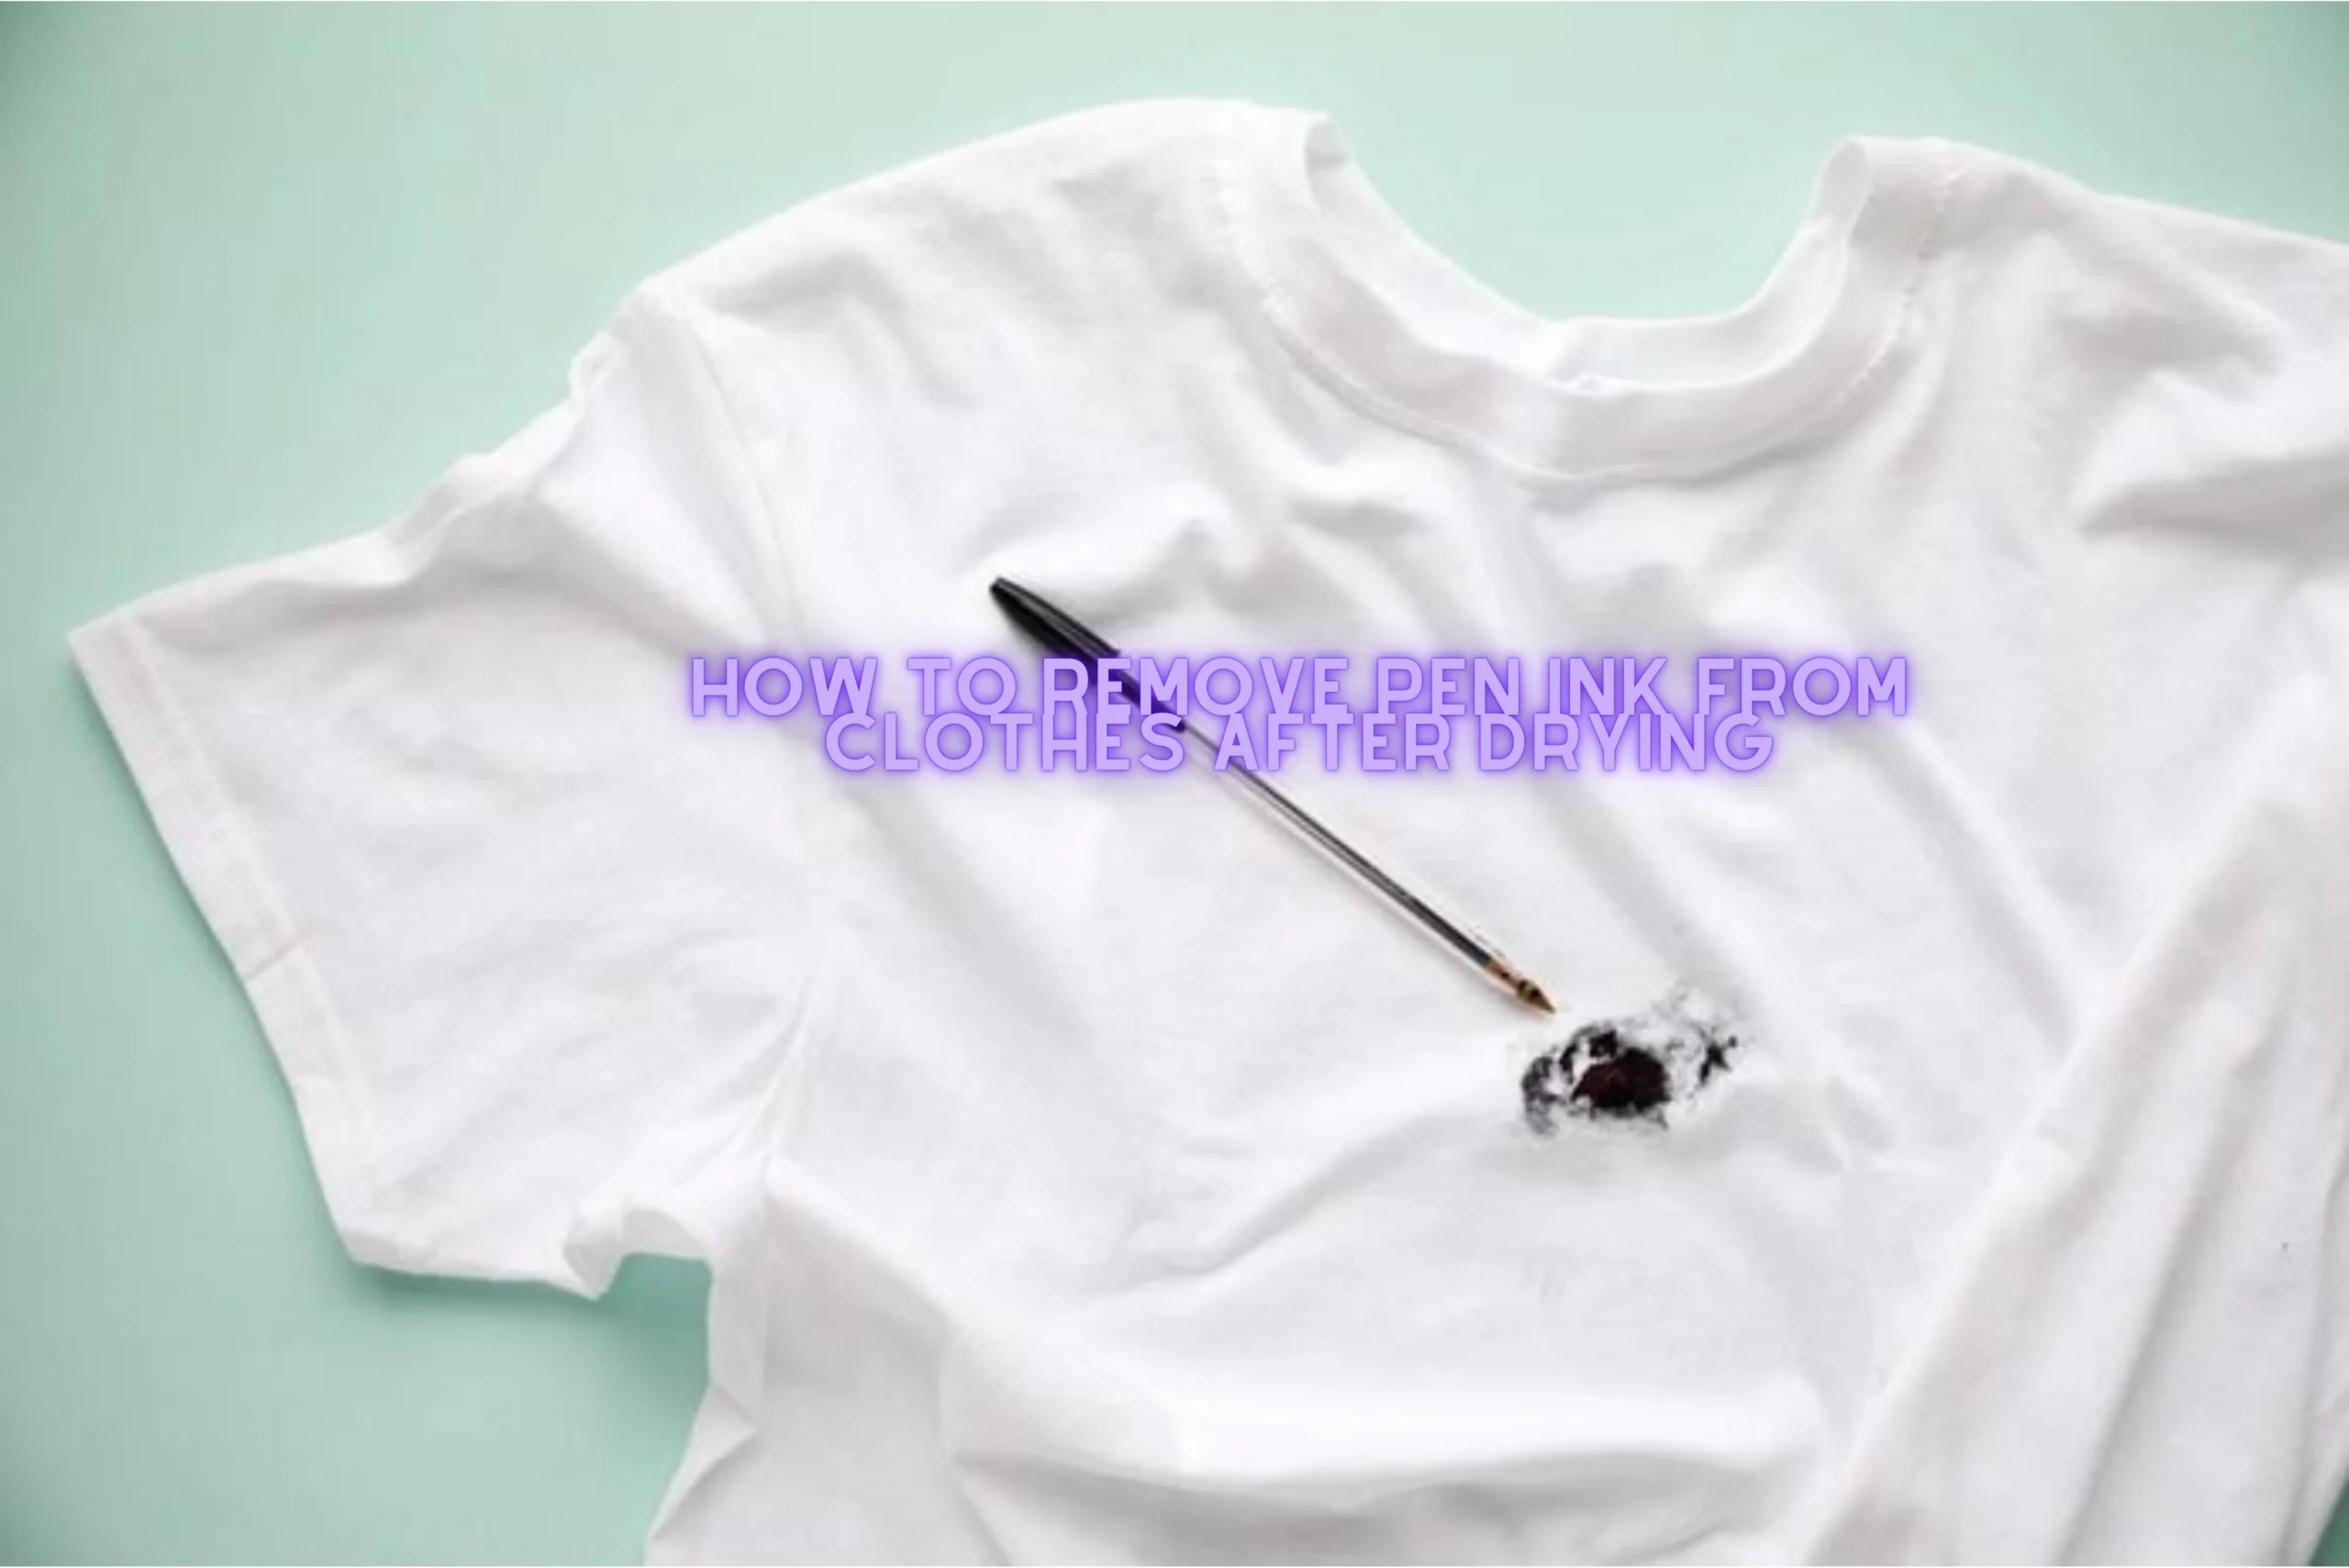 How to Remove Pen Ink from Clothes After Drying Effective Stain Removal Techniques